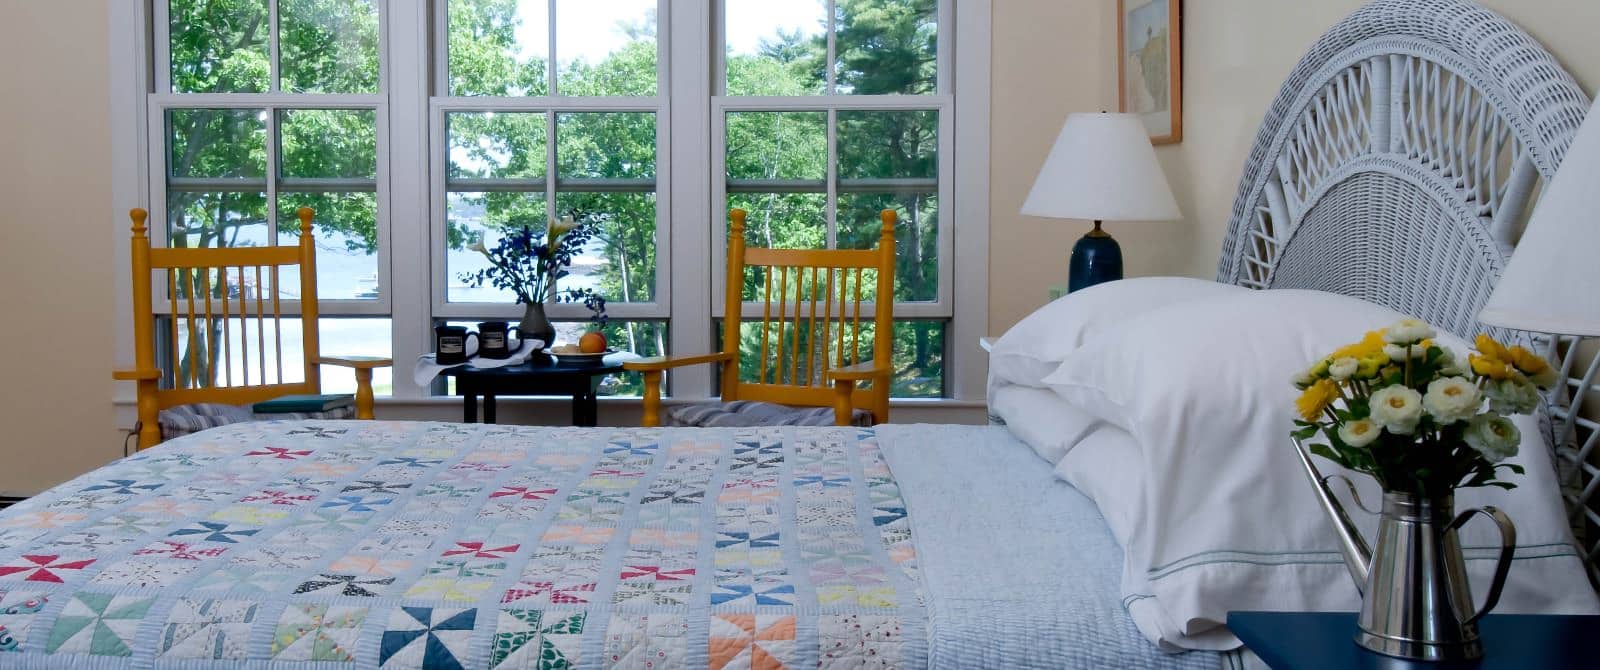 Bright and airy bedroom with bed made up in a colorful quilt with a wicker headboard and two wooden chairs in a seating area.